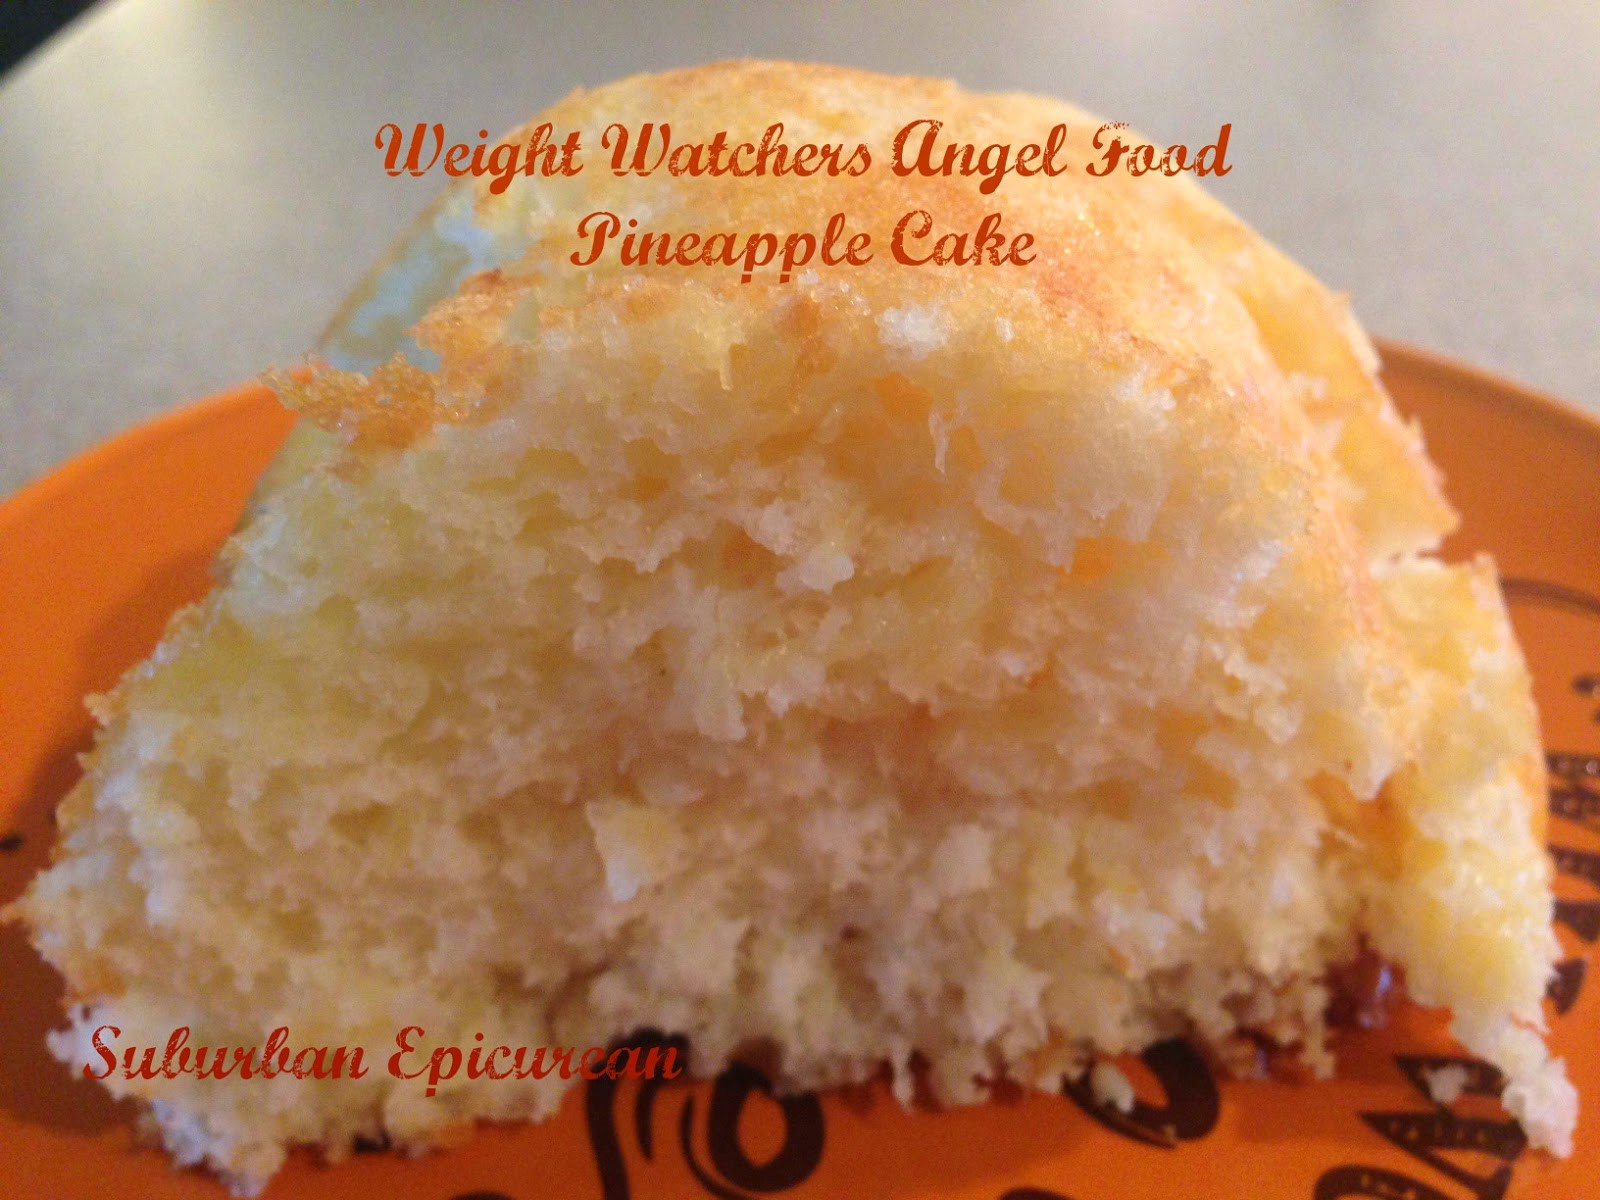 Weight Watcher Angel Food Cake Recipe Awesome Suburban Epicurean Weight Watchers Angel Food Pineapple Cake